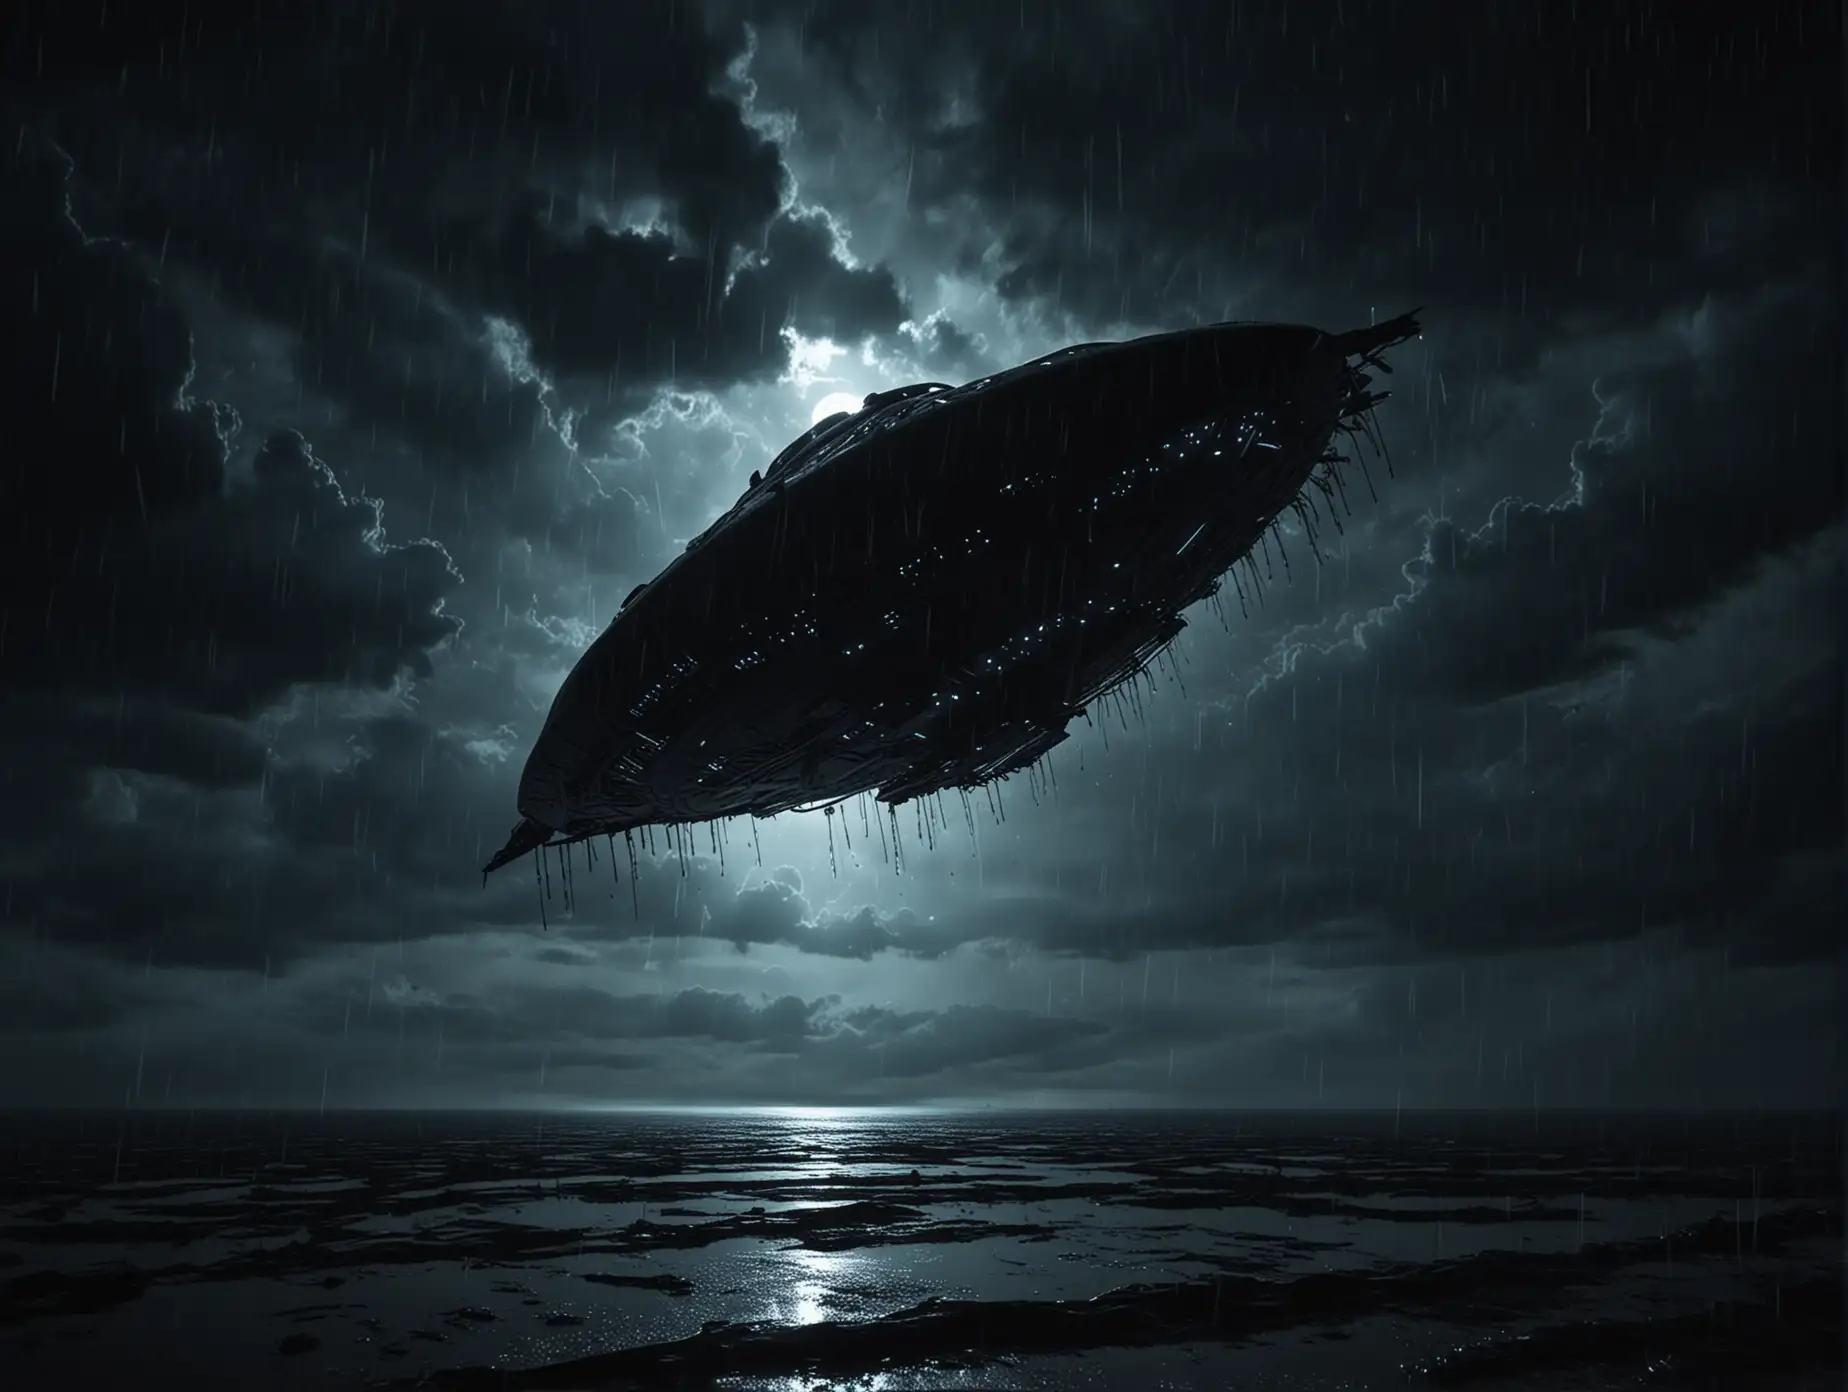 Mysterious-Alien-Spaceship-Silhouette-in-Stormy-Night-Sky